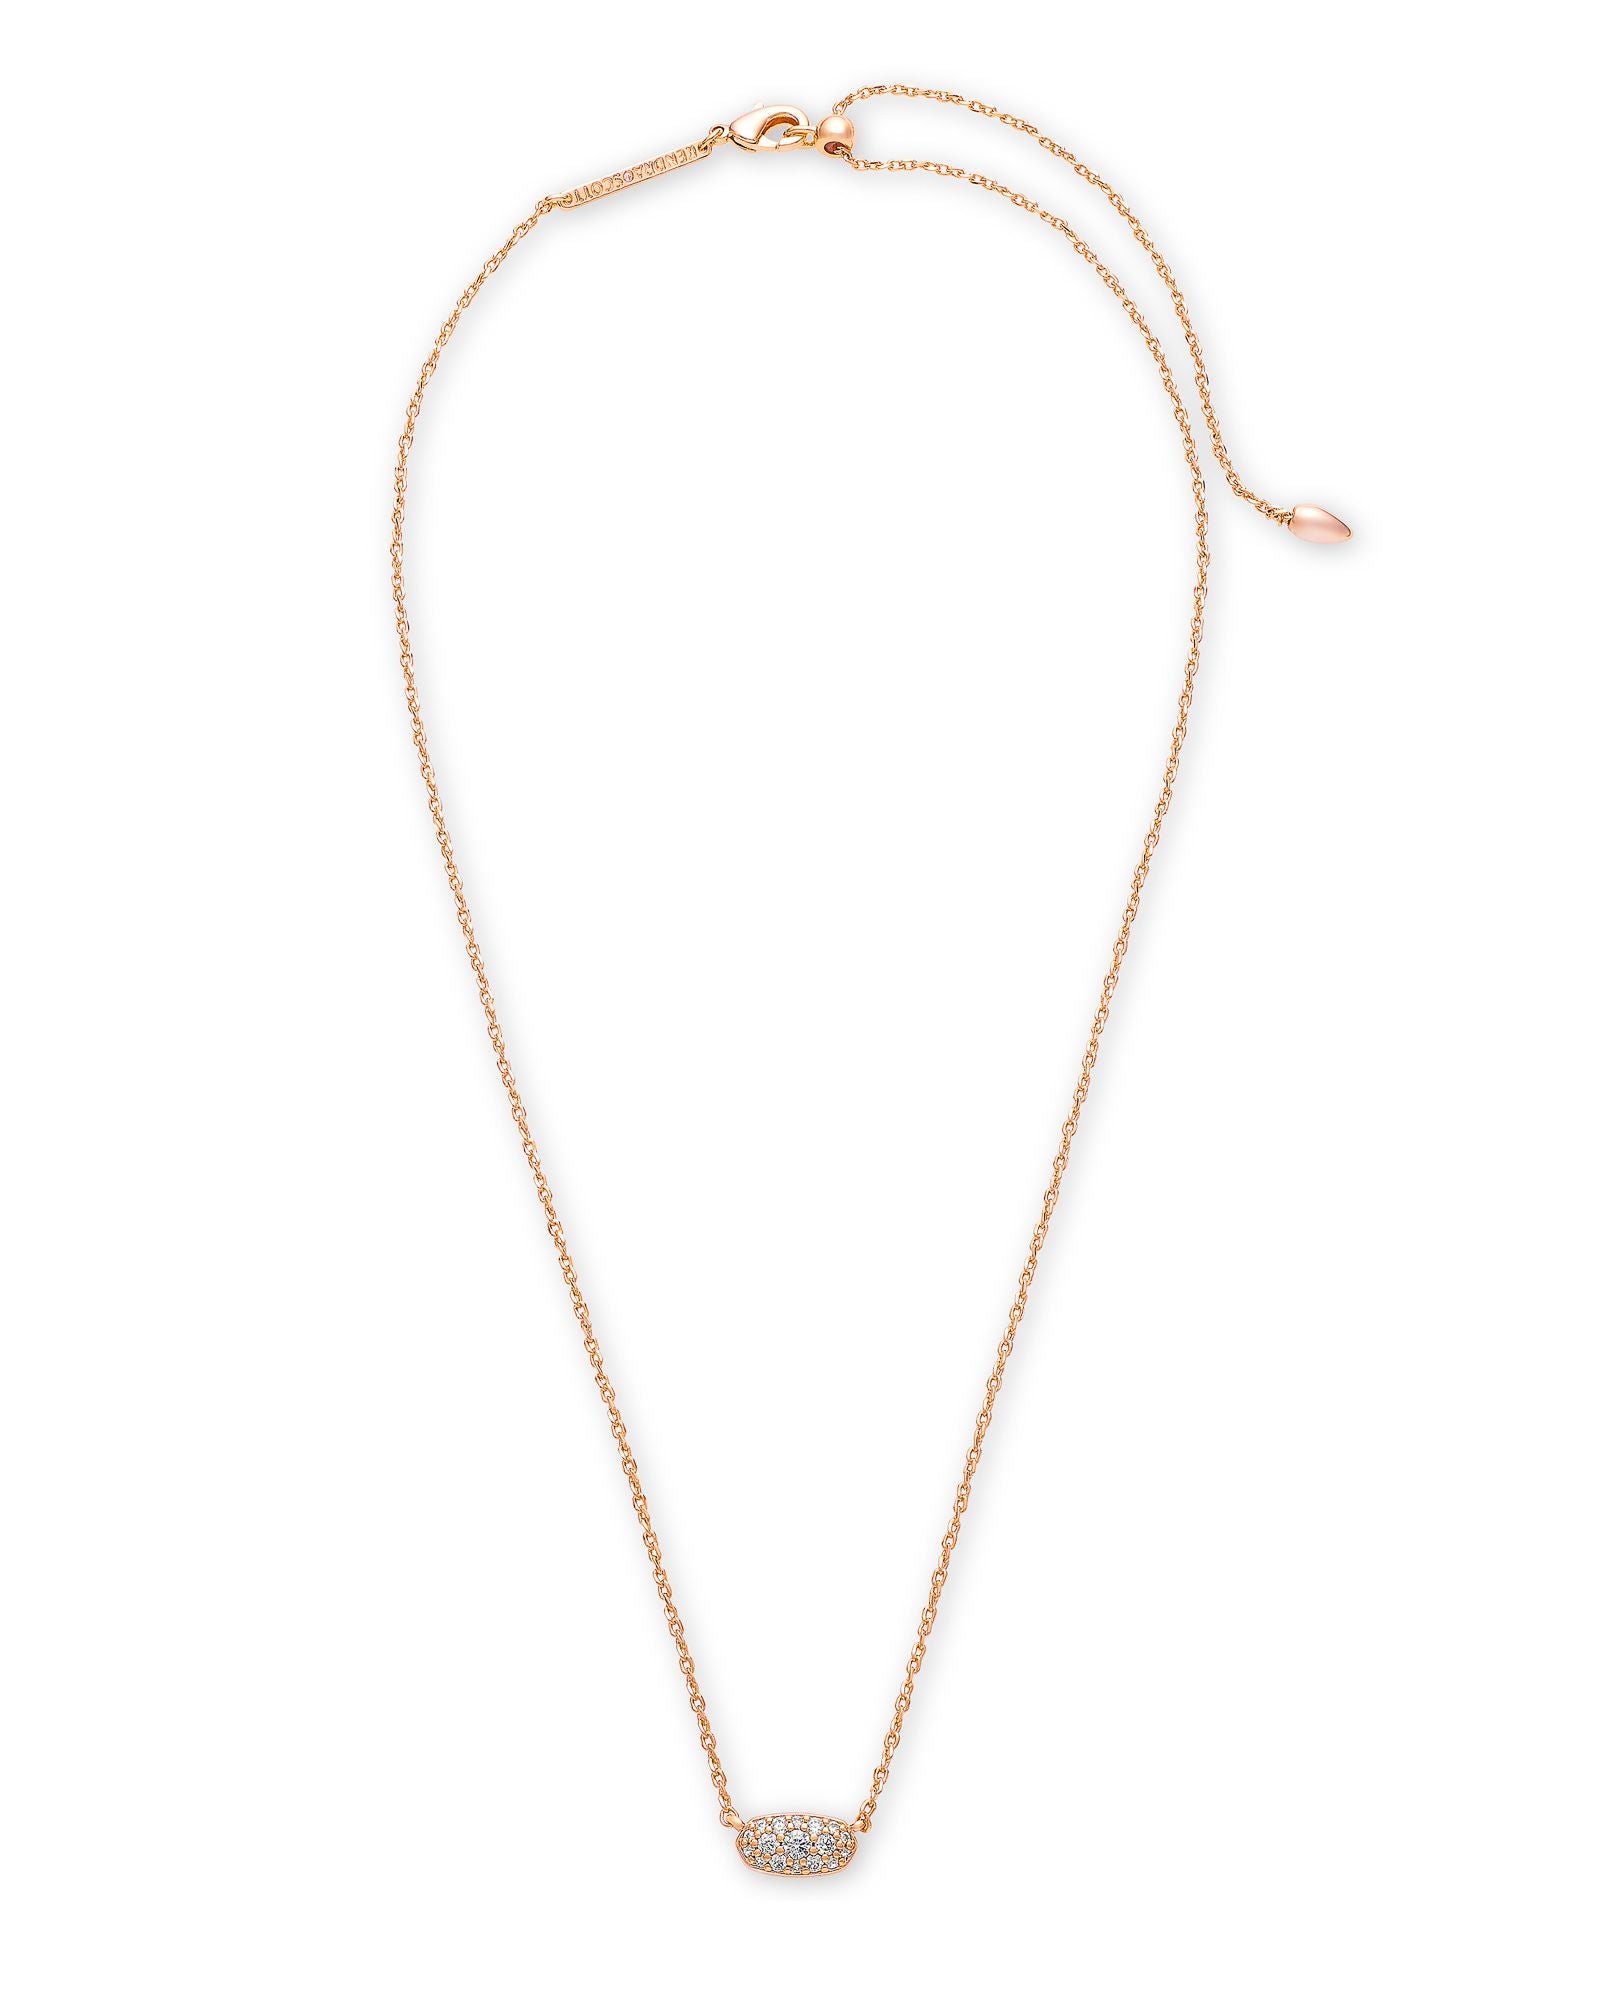 Grayson Crystal Pendant Necklace Silver, Gold or Rose Gold